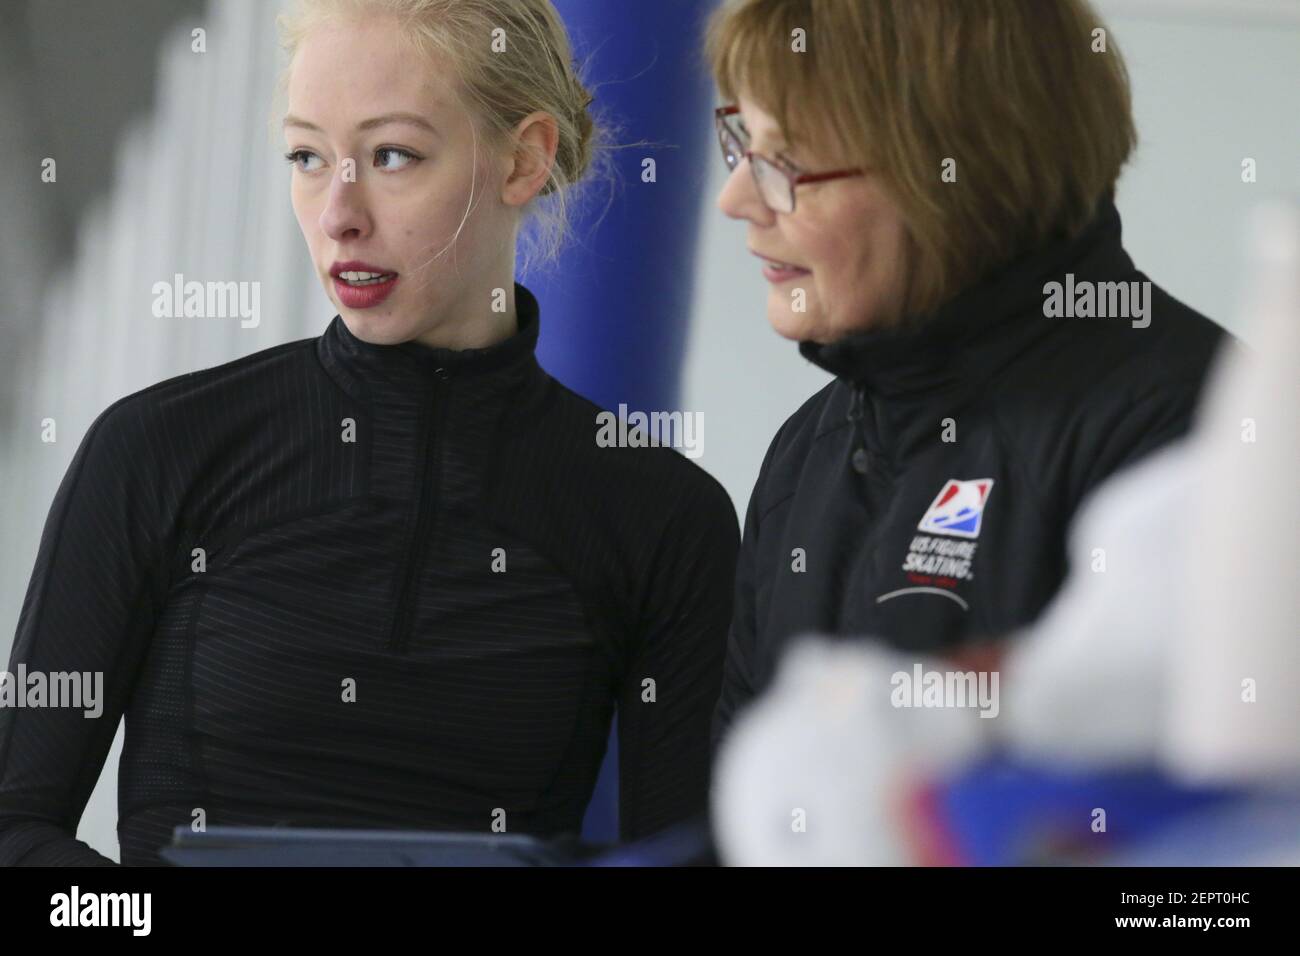 Olympic ice skater Bradie Tennell, left, speaks with her coach, Denise Myers, during practice at the Twin Rinks Ice Pavilion in Buffalo Grove, Ill., on January 29, 2018. Tennell will represent the United States in the 2018 Winter Olympic Games in Pyeongcheng, South Korea. (Photo by Stacey Wescott/Chicago Tribune/TNS/Sipa USA) Stock Photo